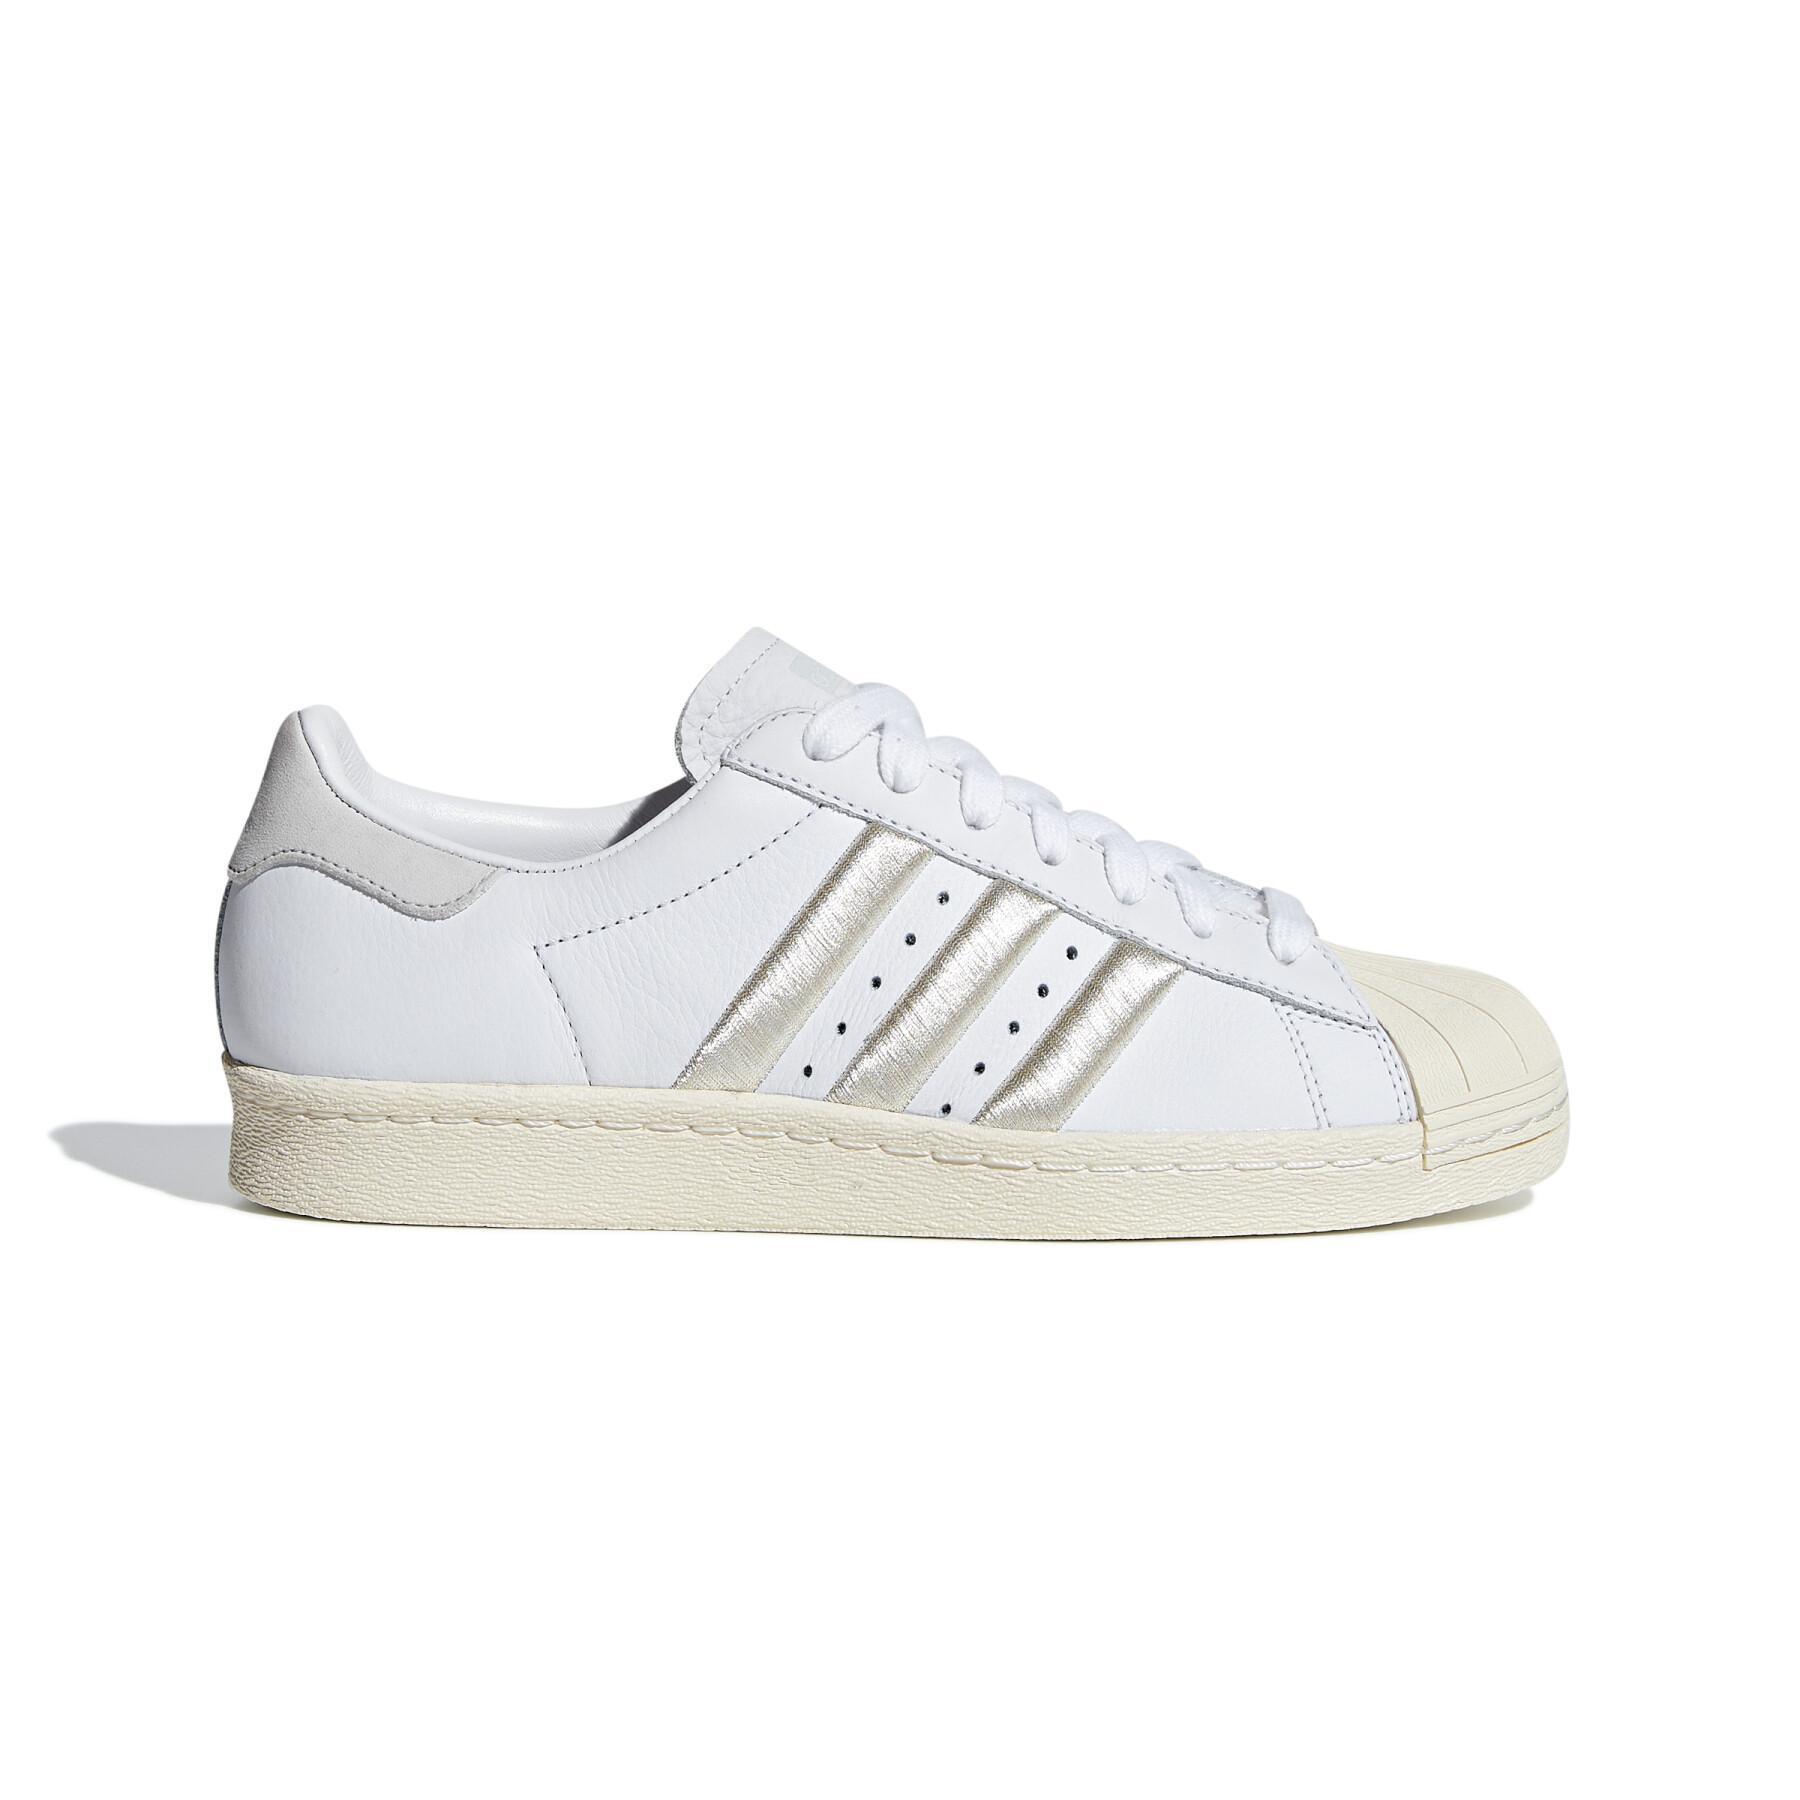 Sneakers woman Adidas Superstar 80s